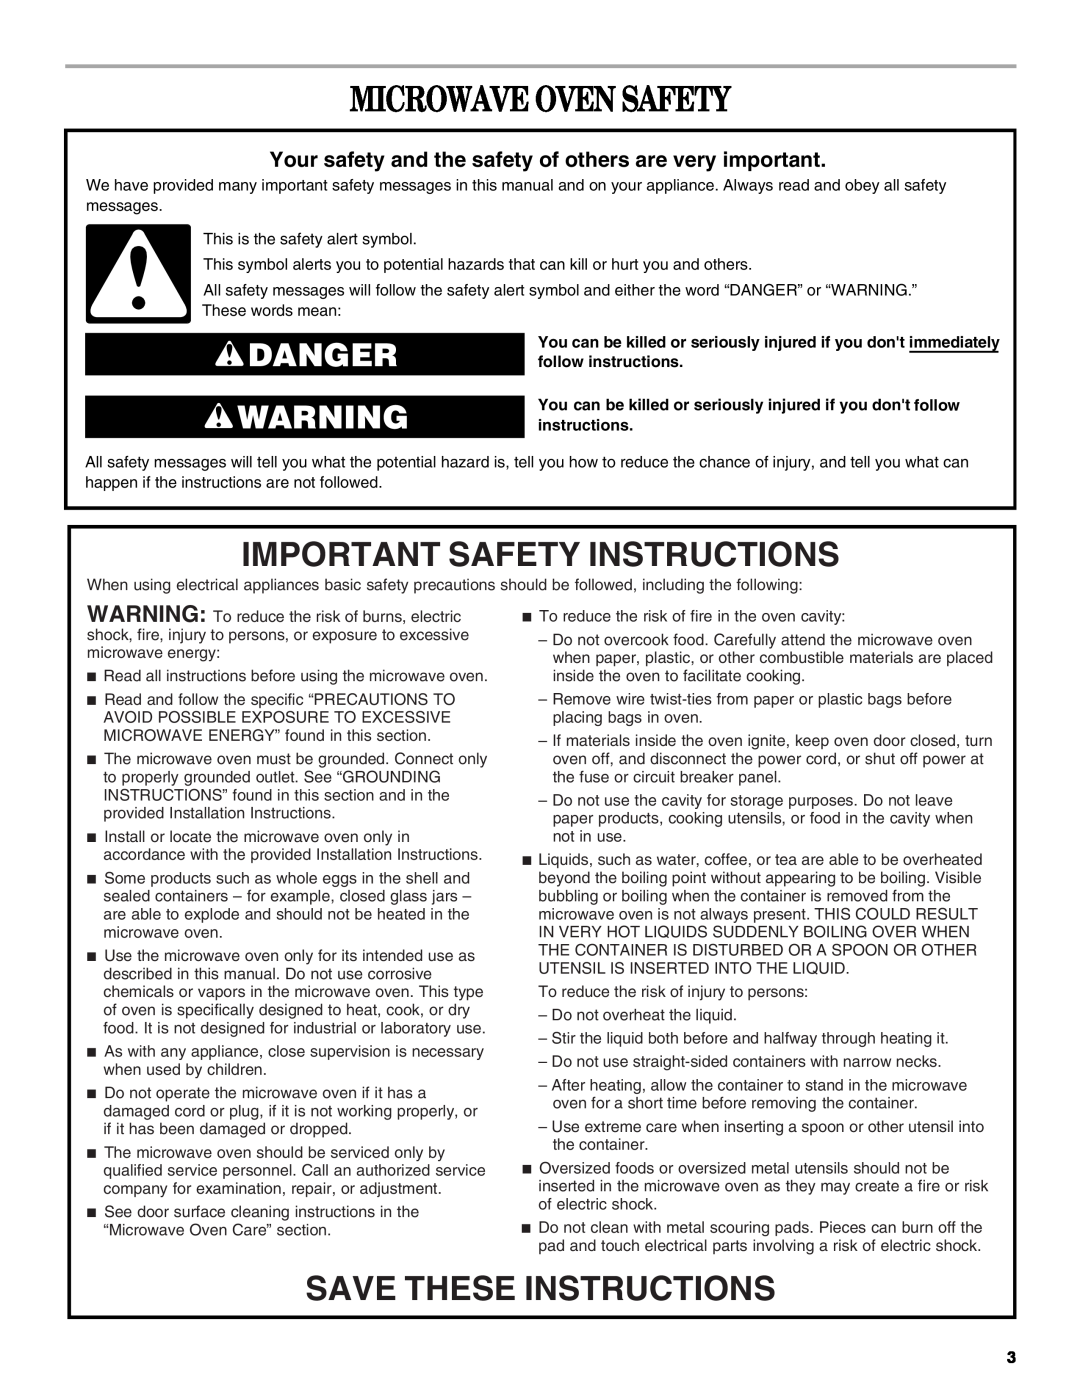 Whirlpool MT4110 manual Microwave Oven Safety, Important Safety Instructions, Save These Instructions, Danger 